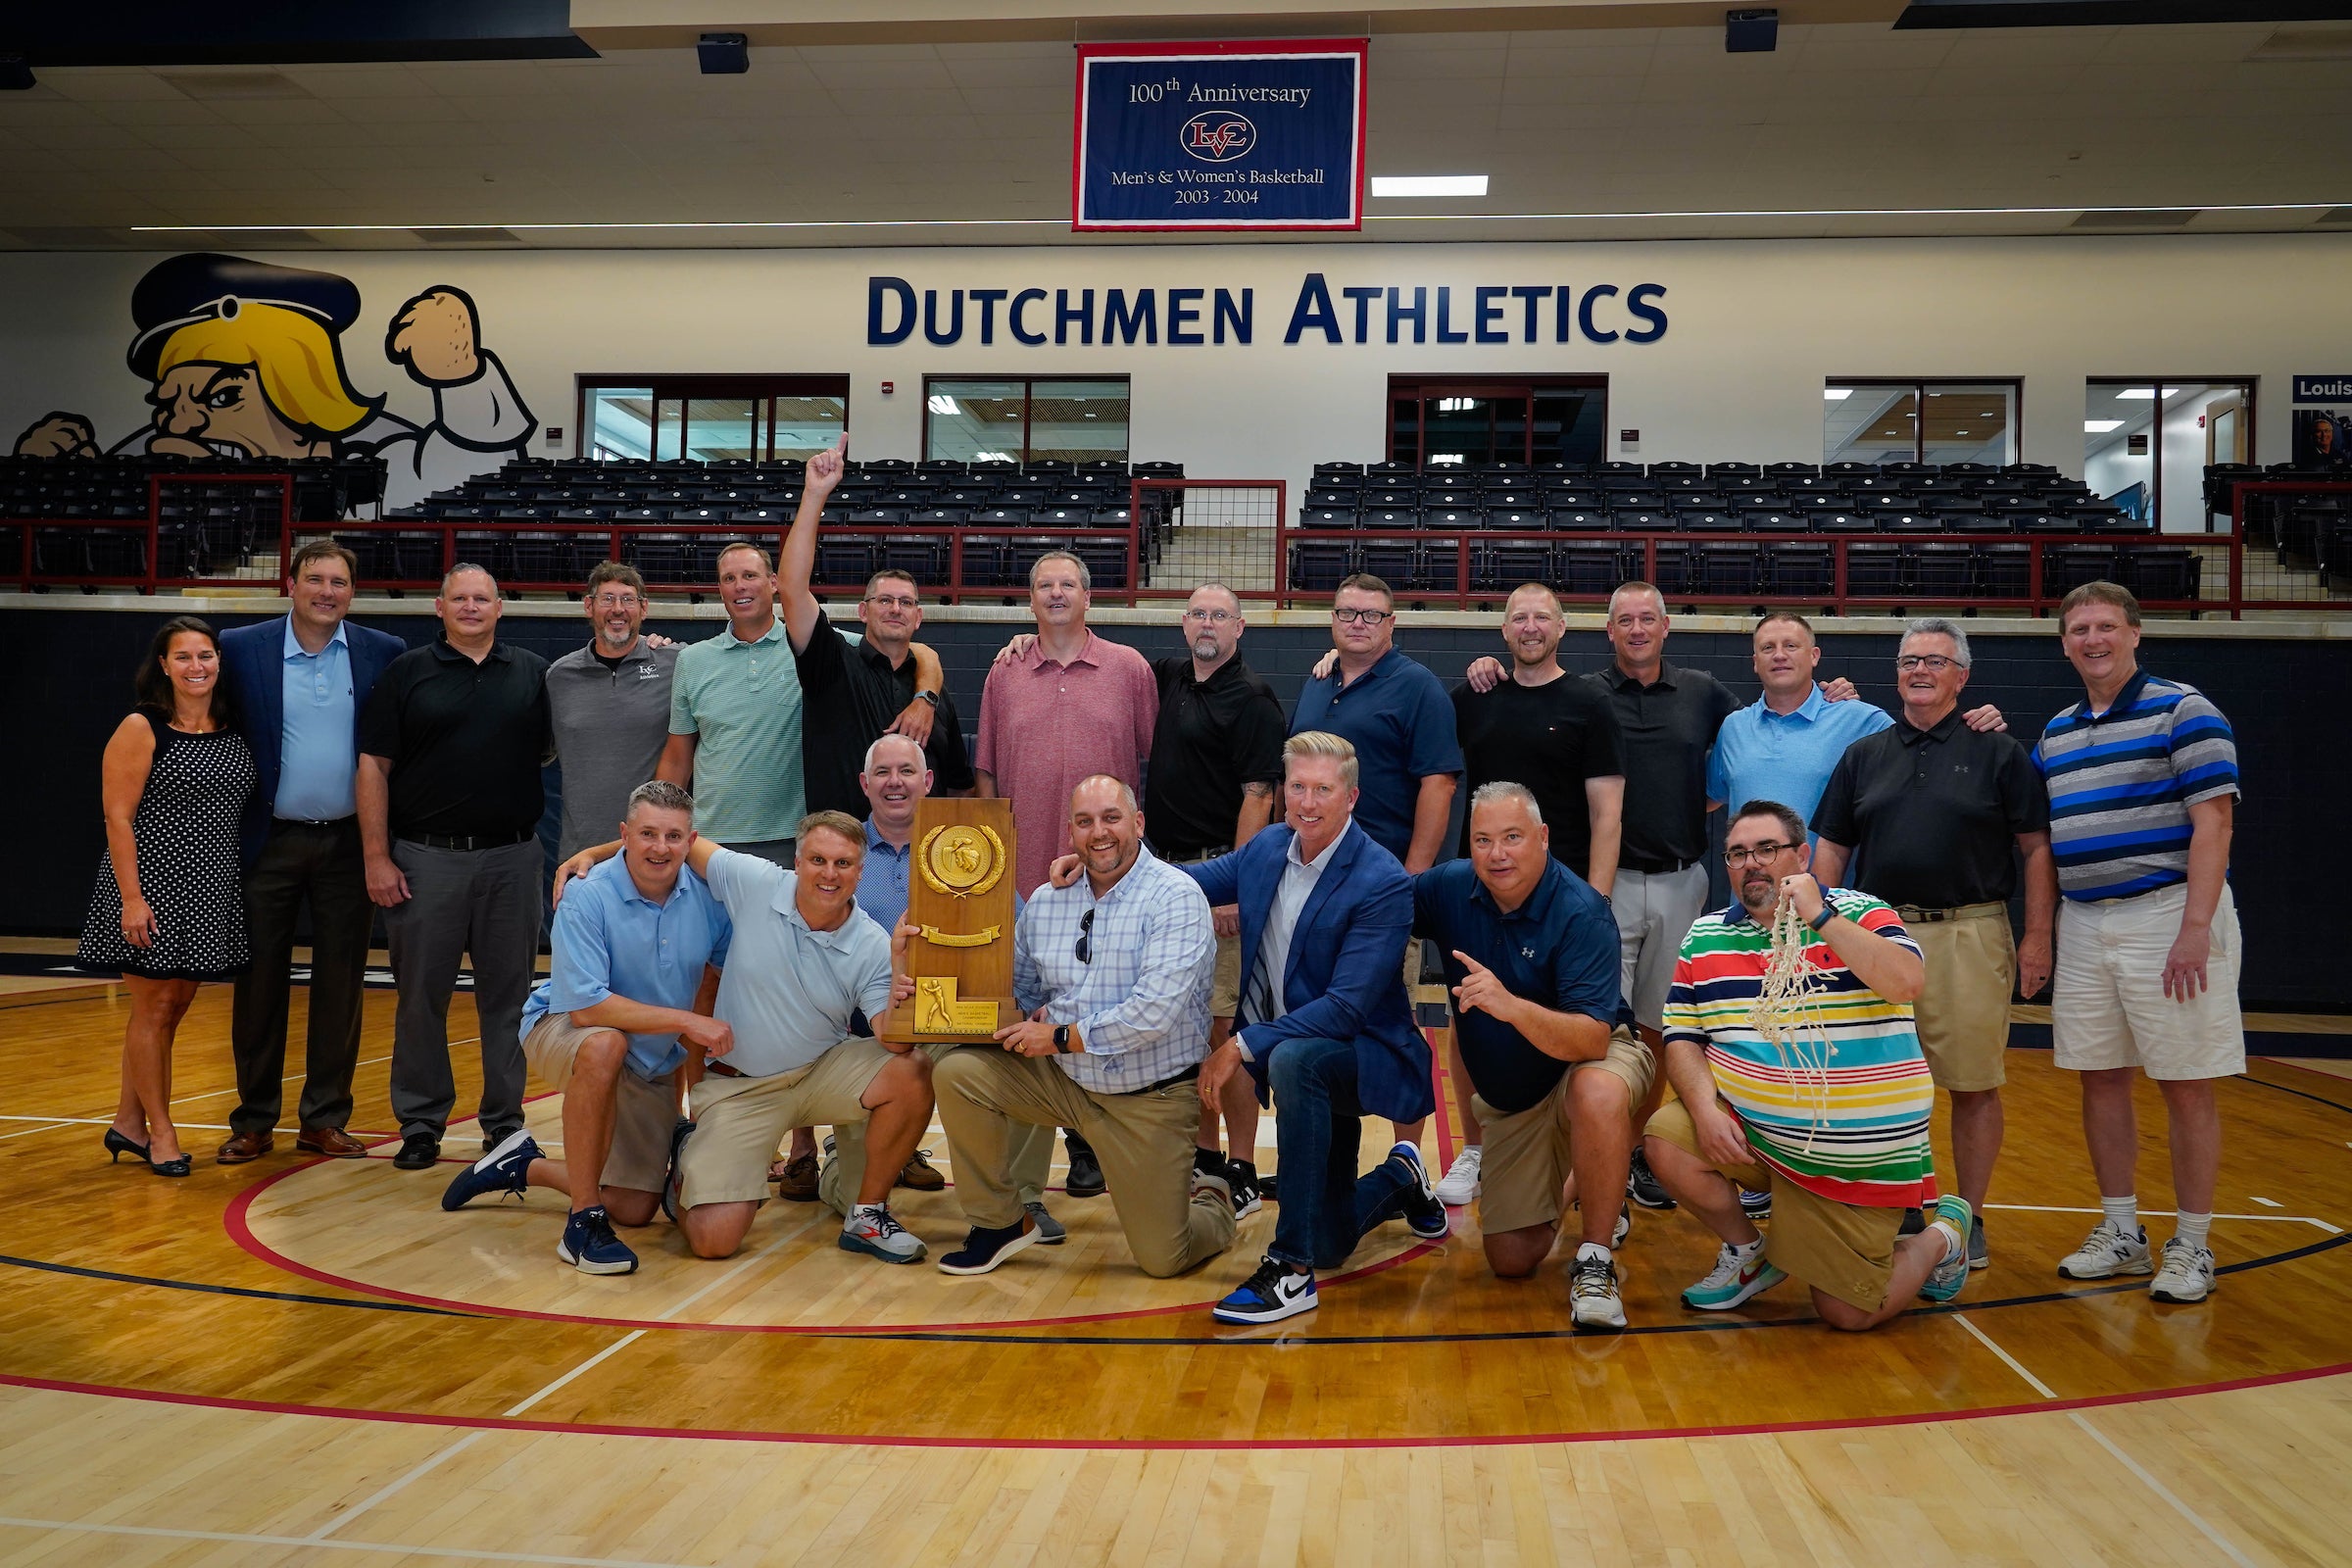 LVC's 1994 championship basketball team players reunite on campus for shooting of The Dutchmen documentary.